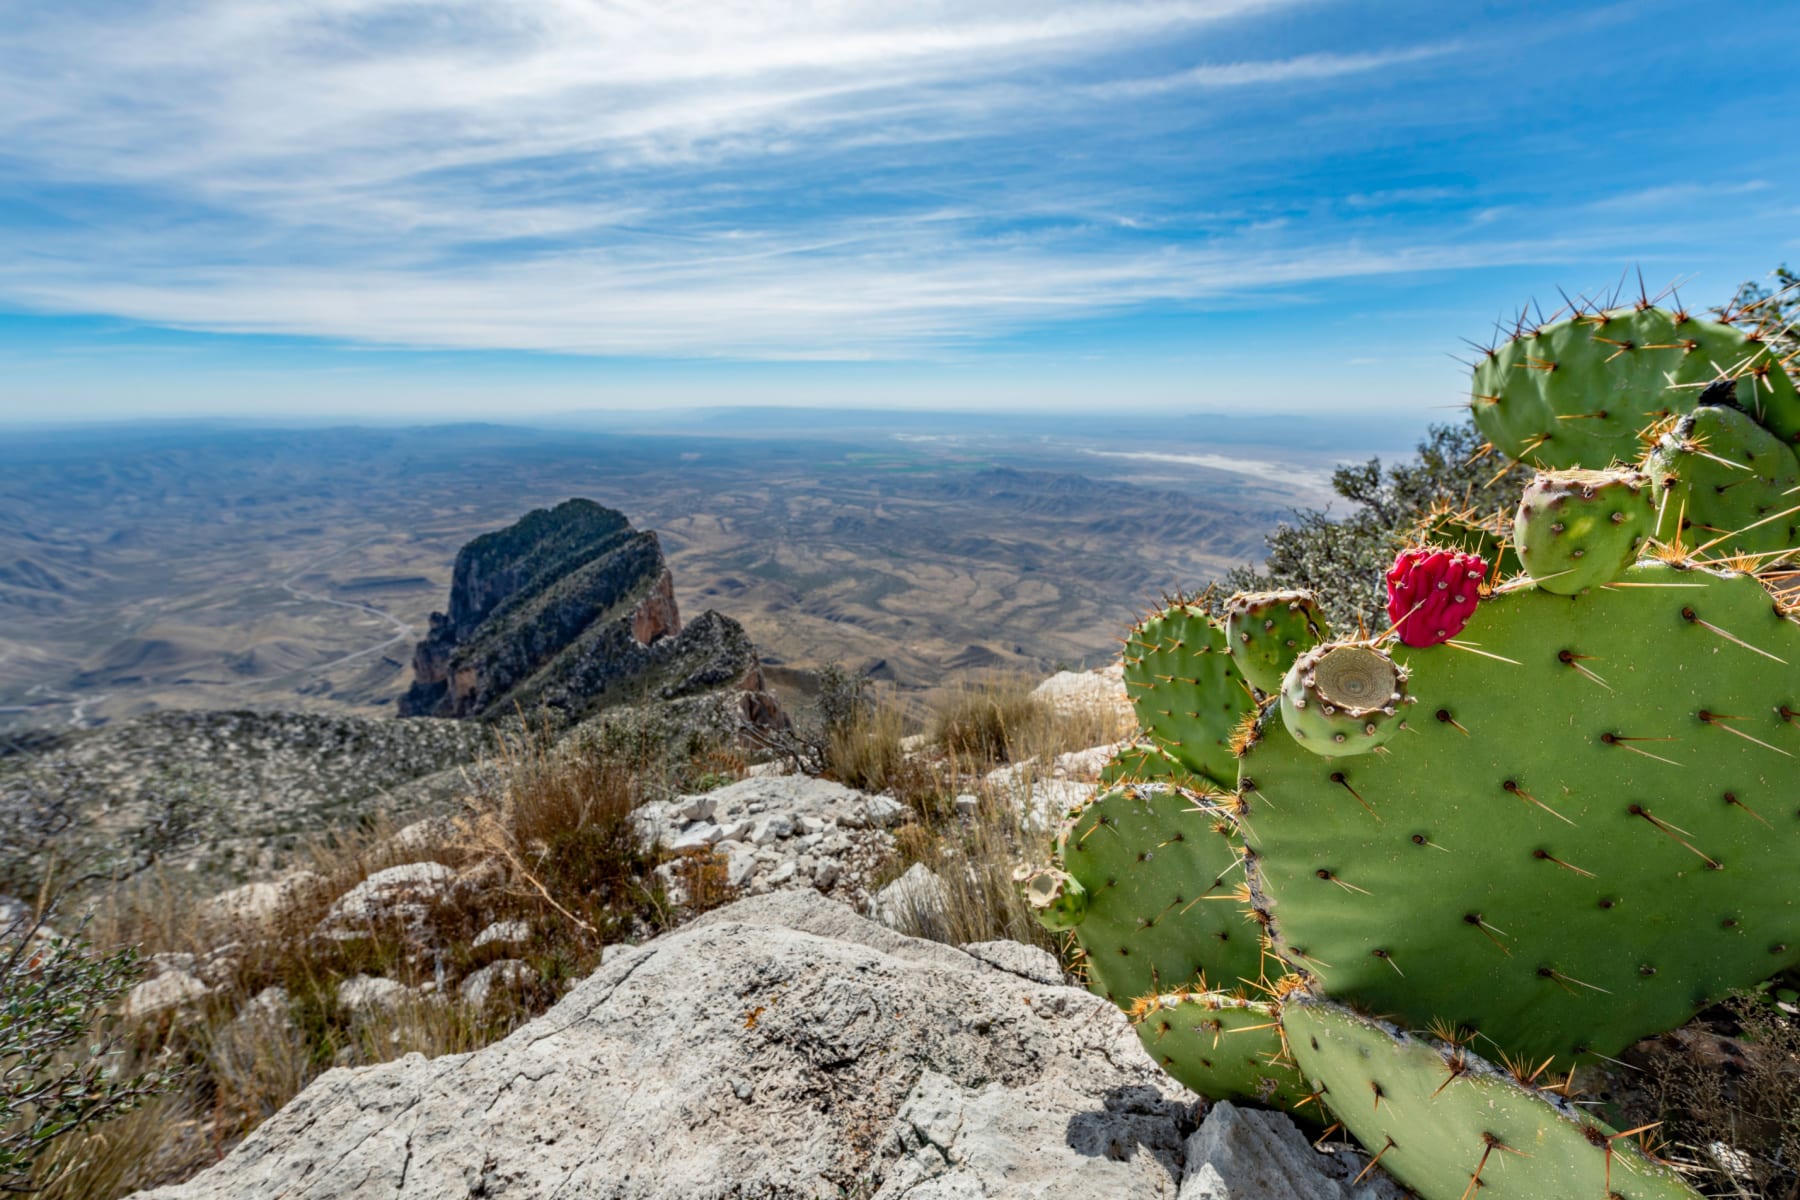 A green cactus with red flowering fruit looks over a prominent peak in the West Texas landscape. 